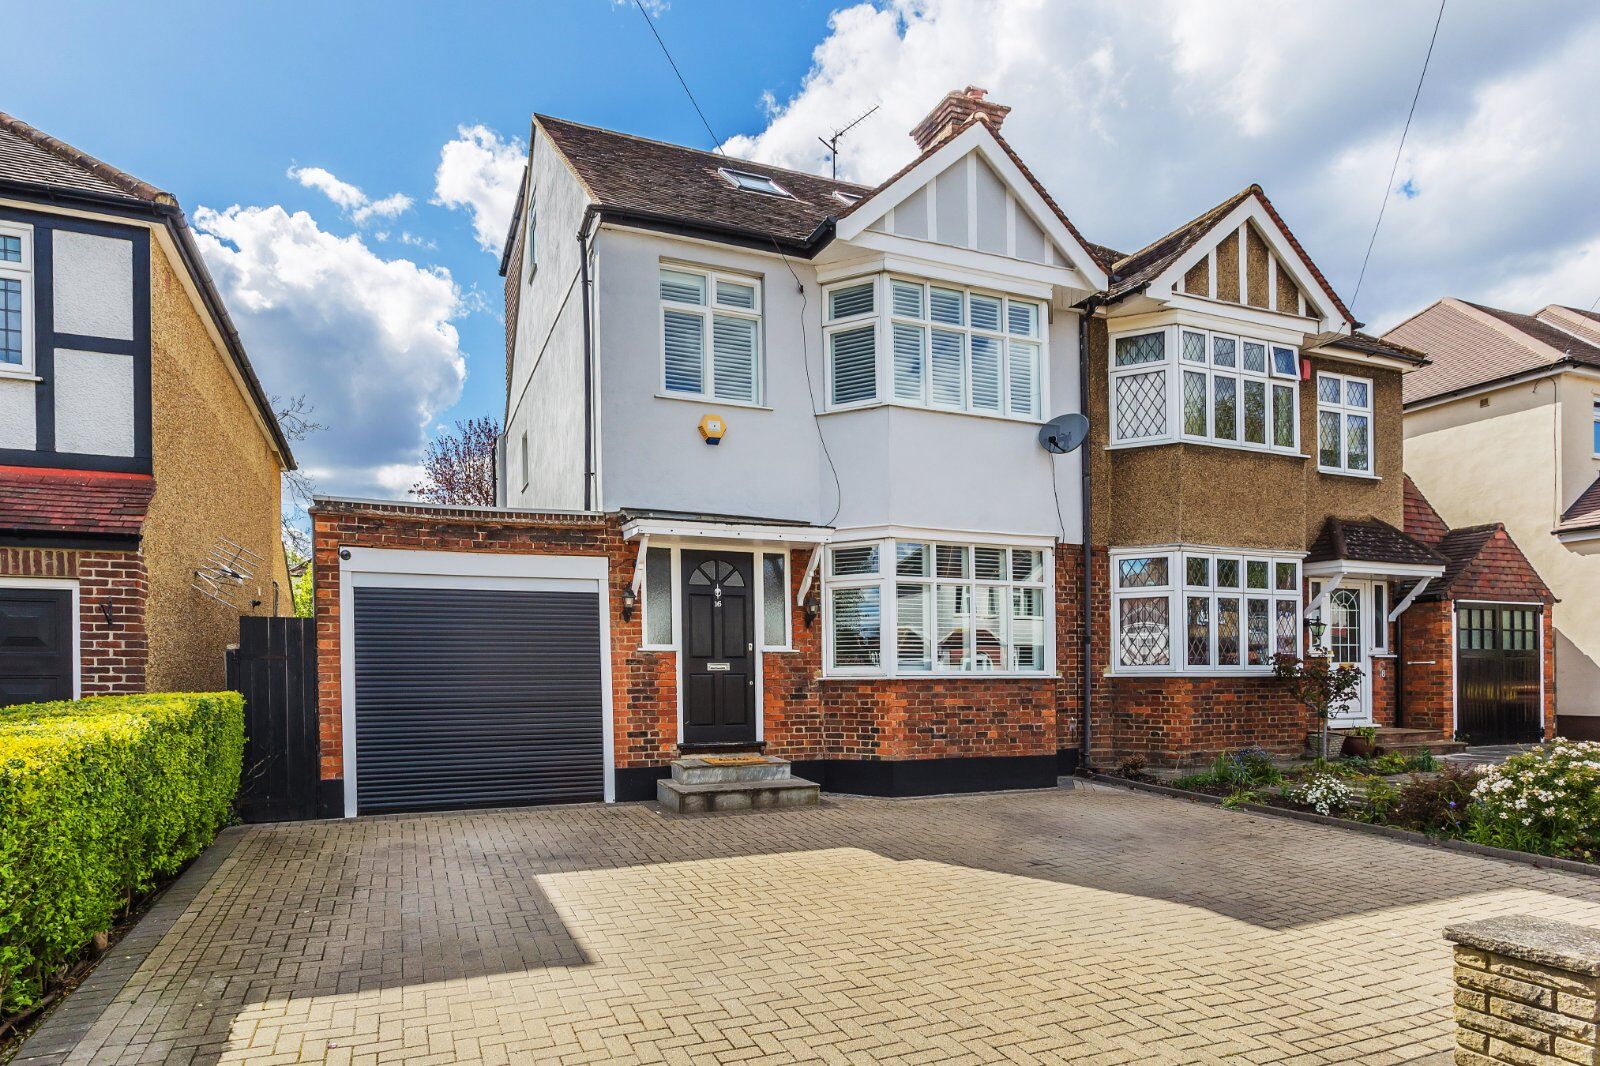 4 bedroom semi detached house for sale Quarry Rise, Cheam, SM1, main image